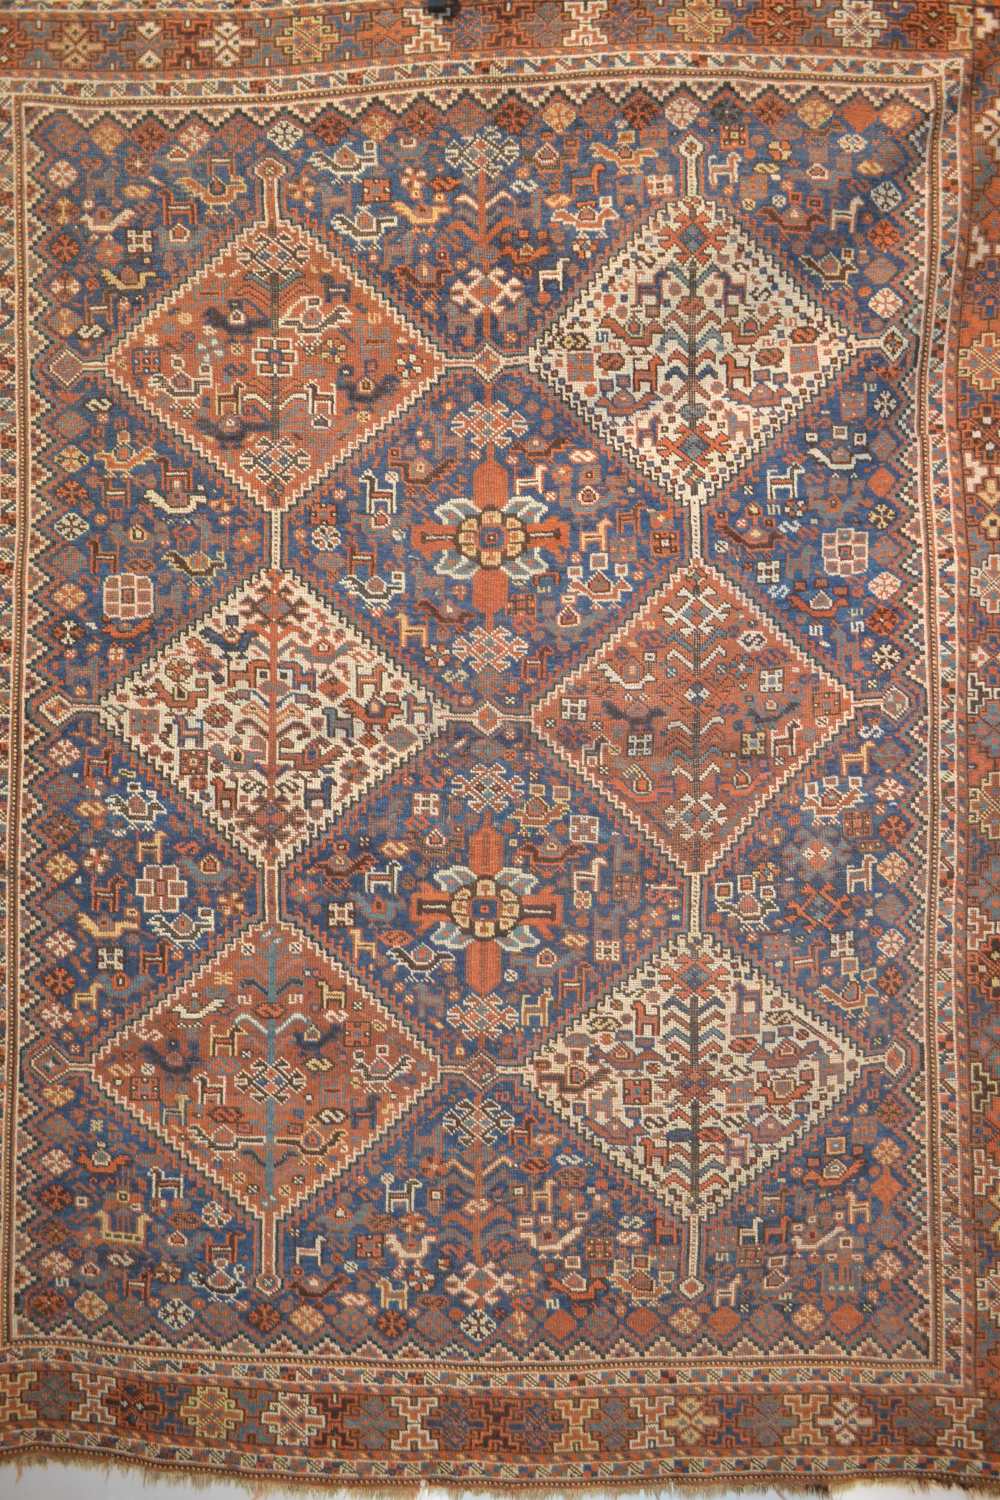 Khamseh rug, Fars, south west Persia, late 19th/early 20th century, 6ft. 6in. x 5ft. 2in. 1.98m. x - Image 2 of 6